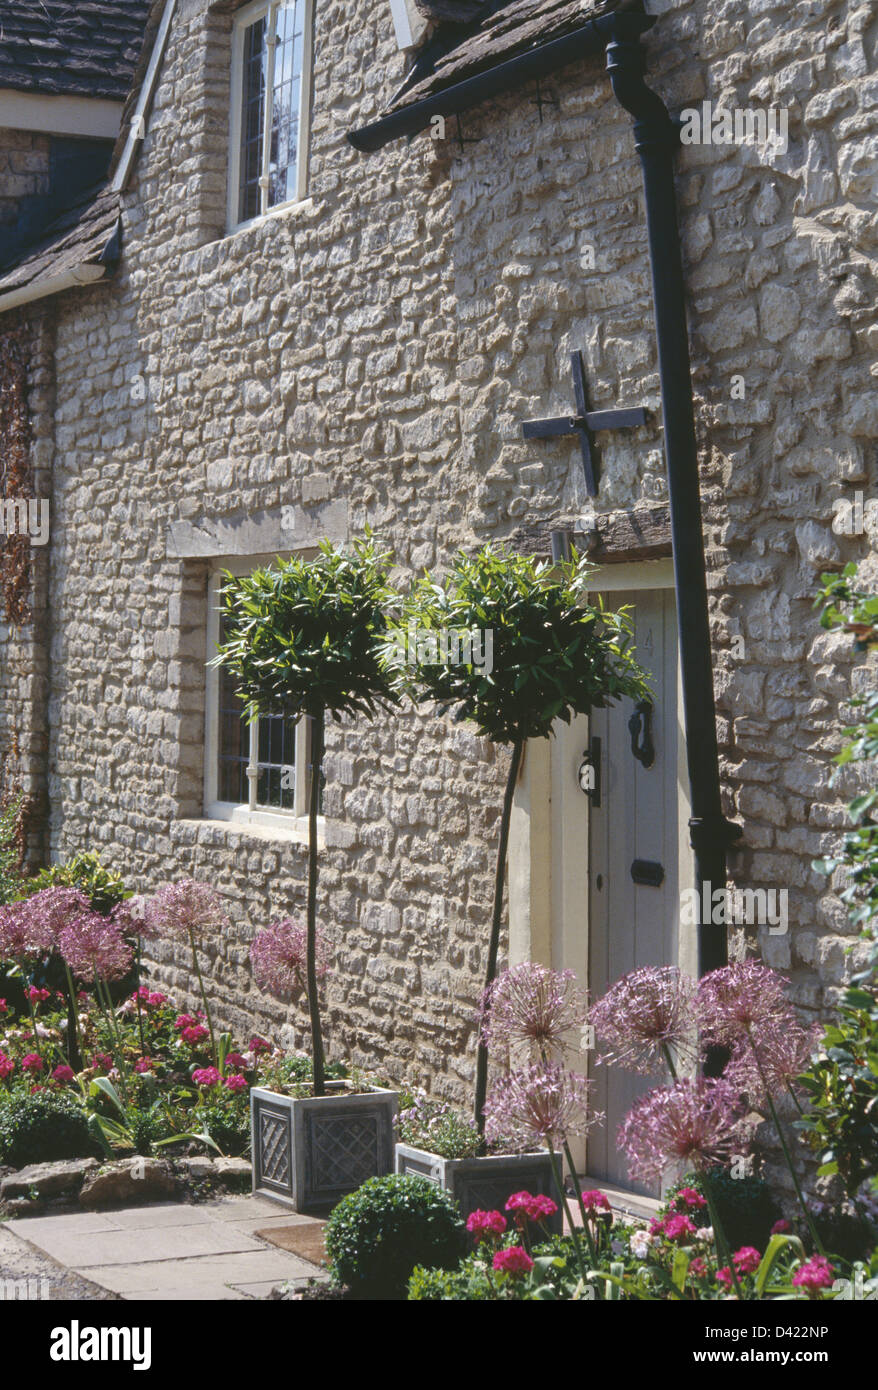 Bay trees in square pots on either side of front door in stone country cottage with mauve alliums in borders Stock Photo